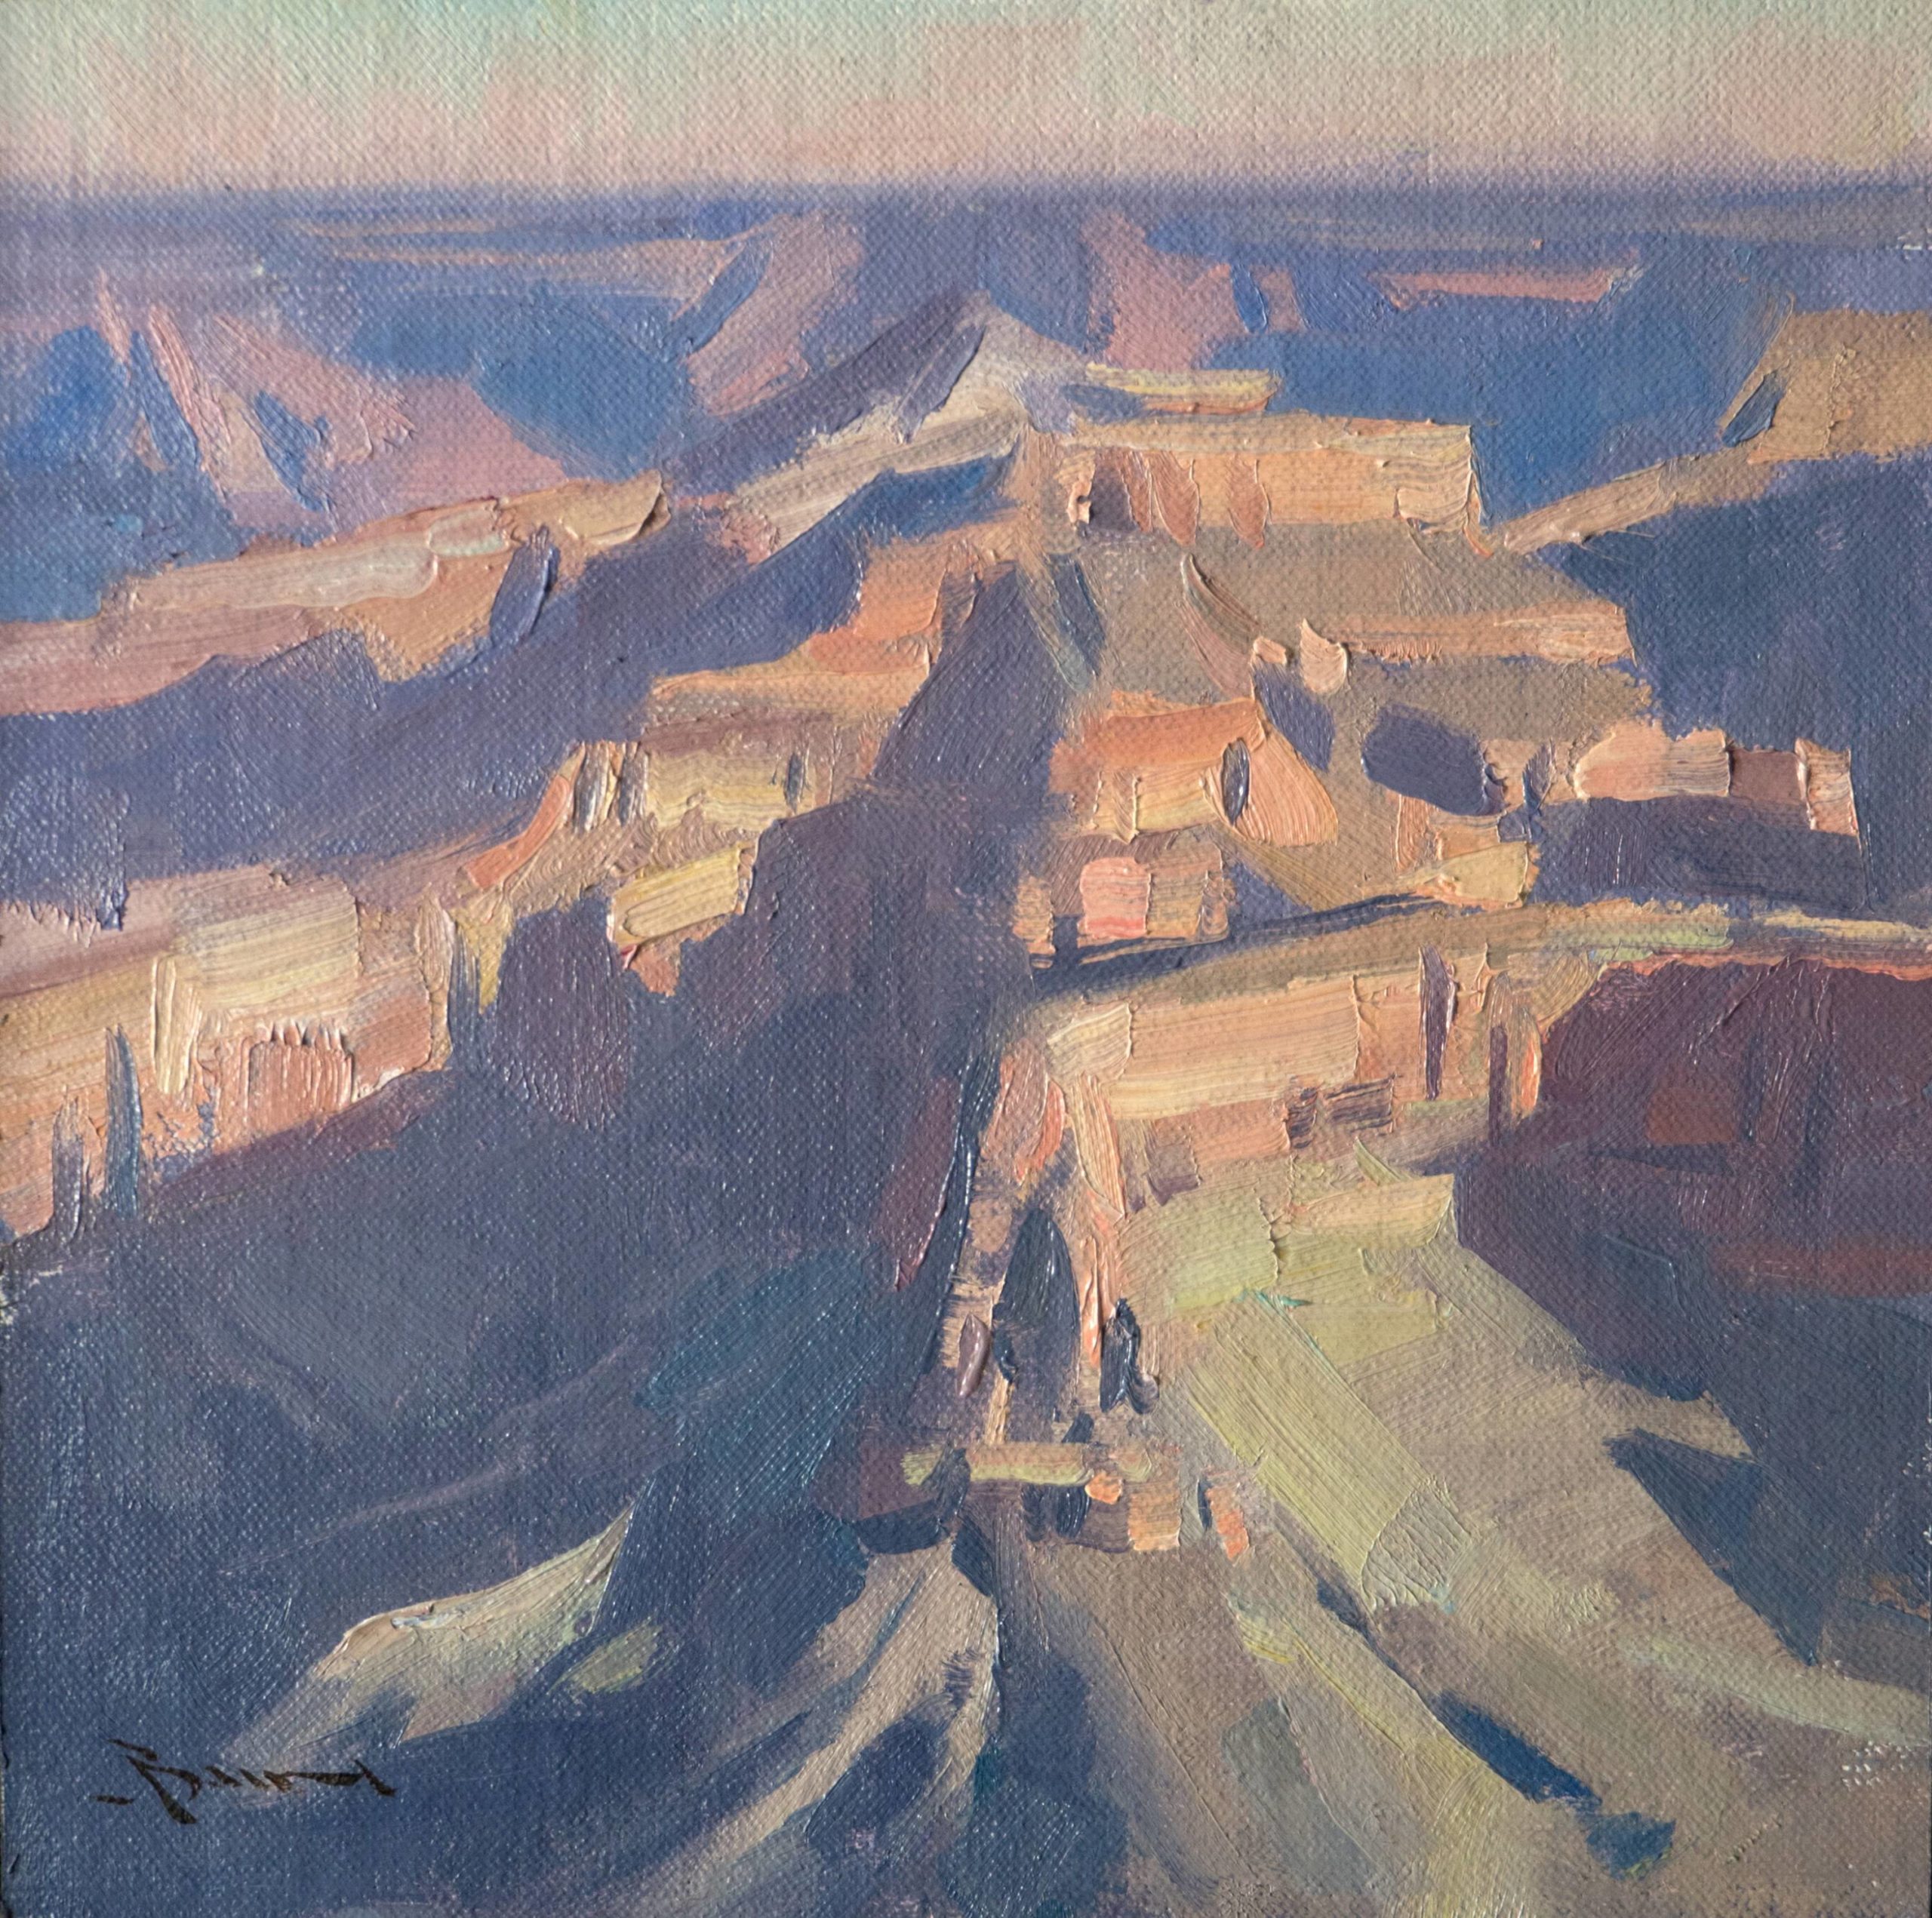 Painting of the Grand Canyon